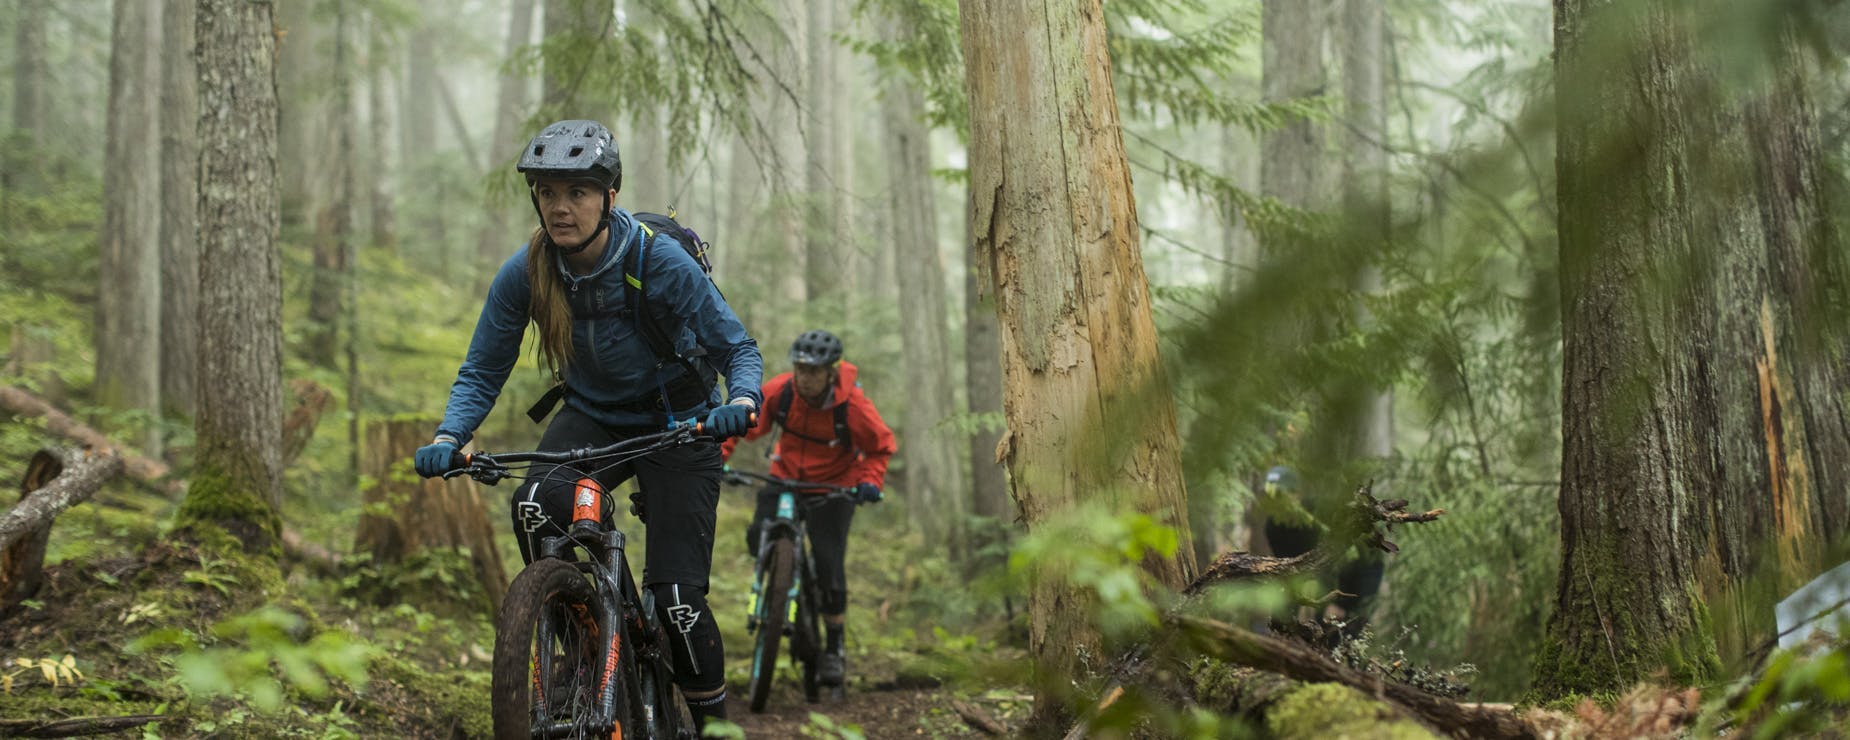 A first-timer’s guide to mountain biking